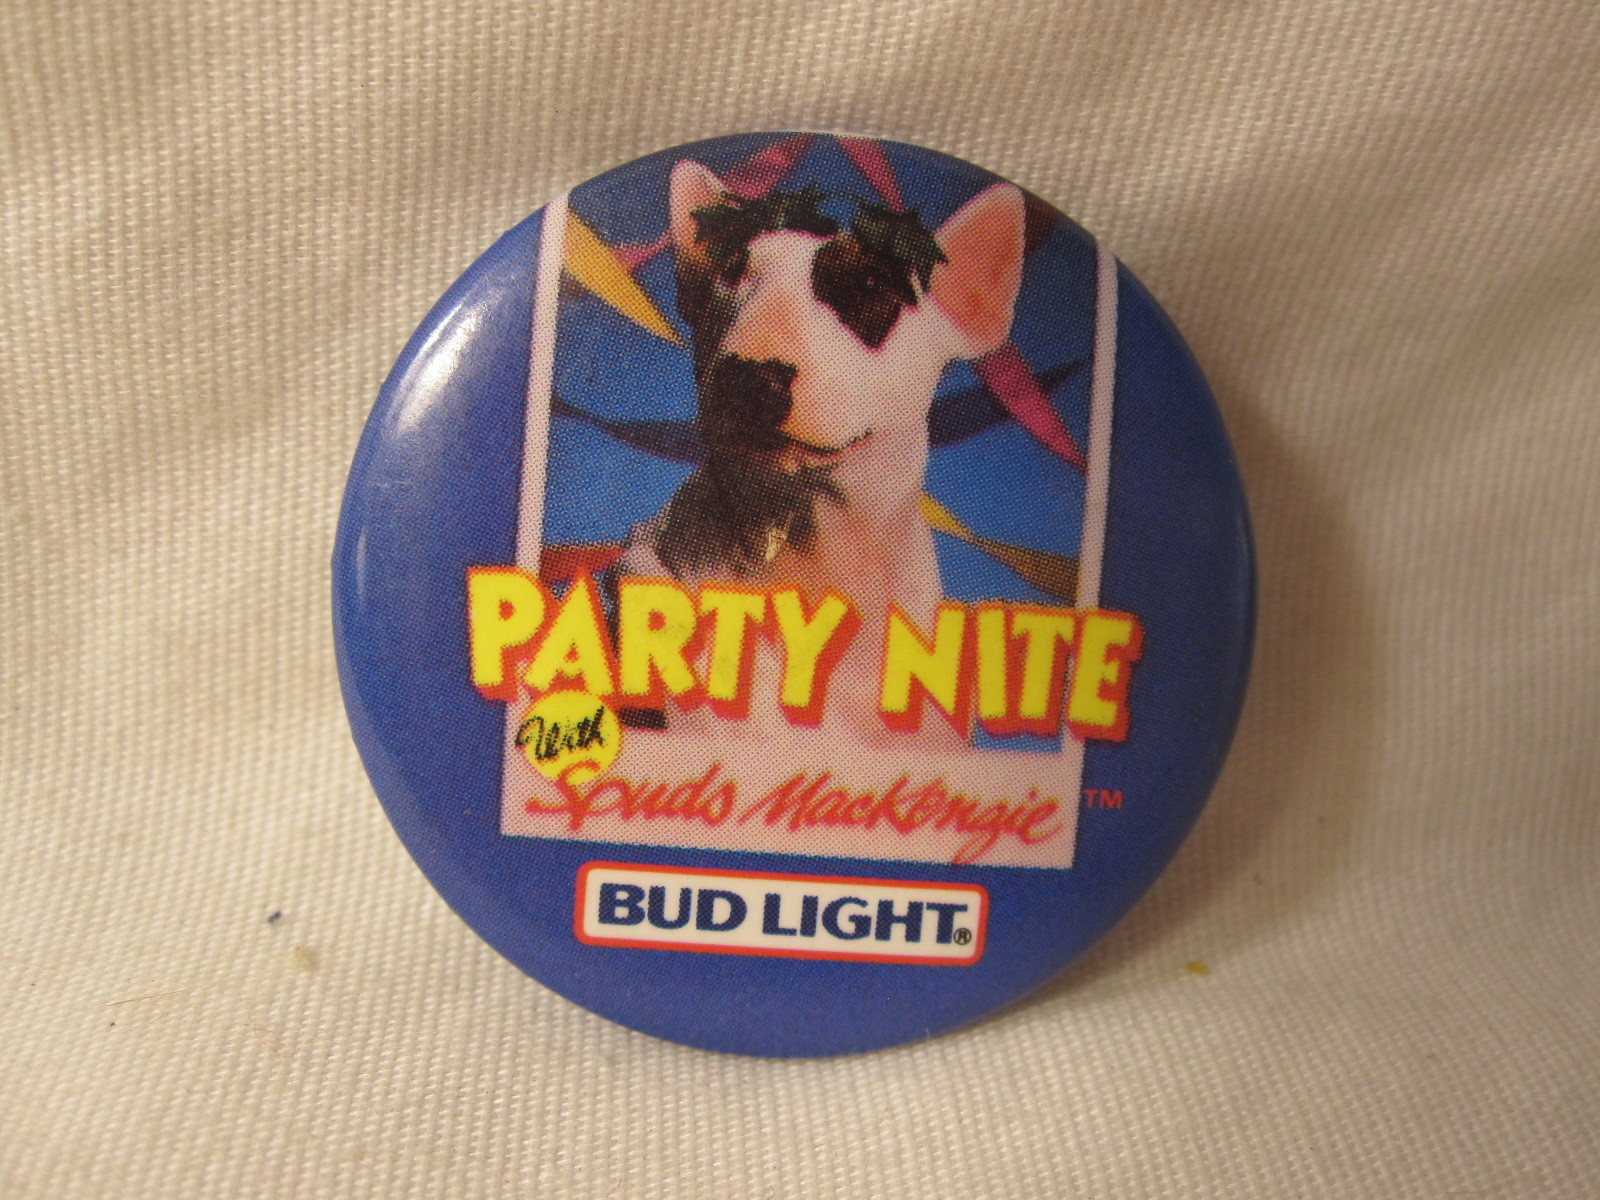 Primary image for vintage 1987 1.25" Bud Light Spuds Mackenzie 'Party Nite' Pinback Button